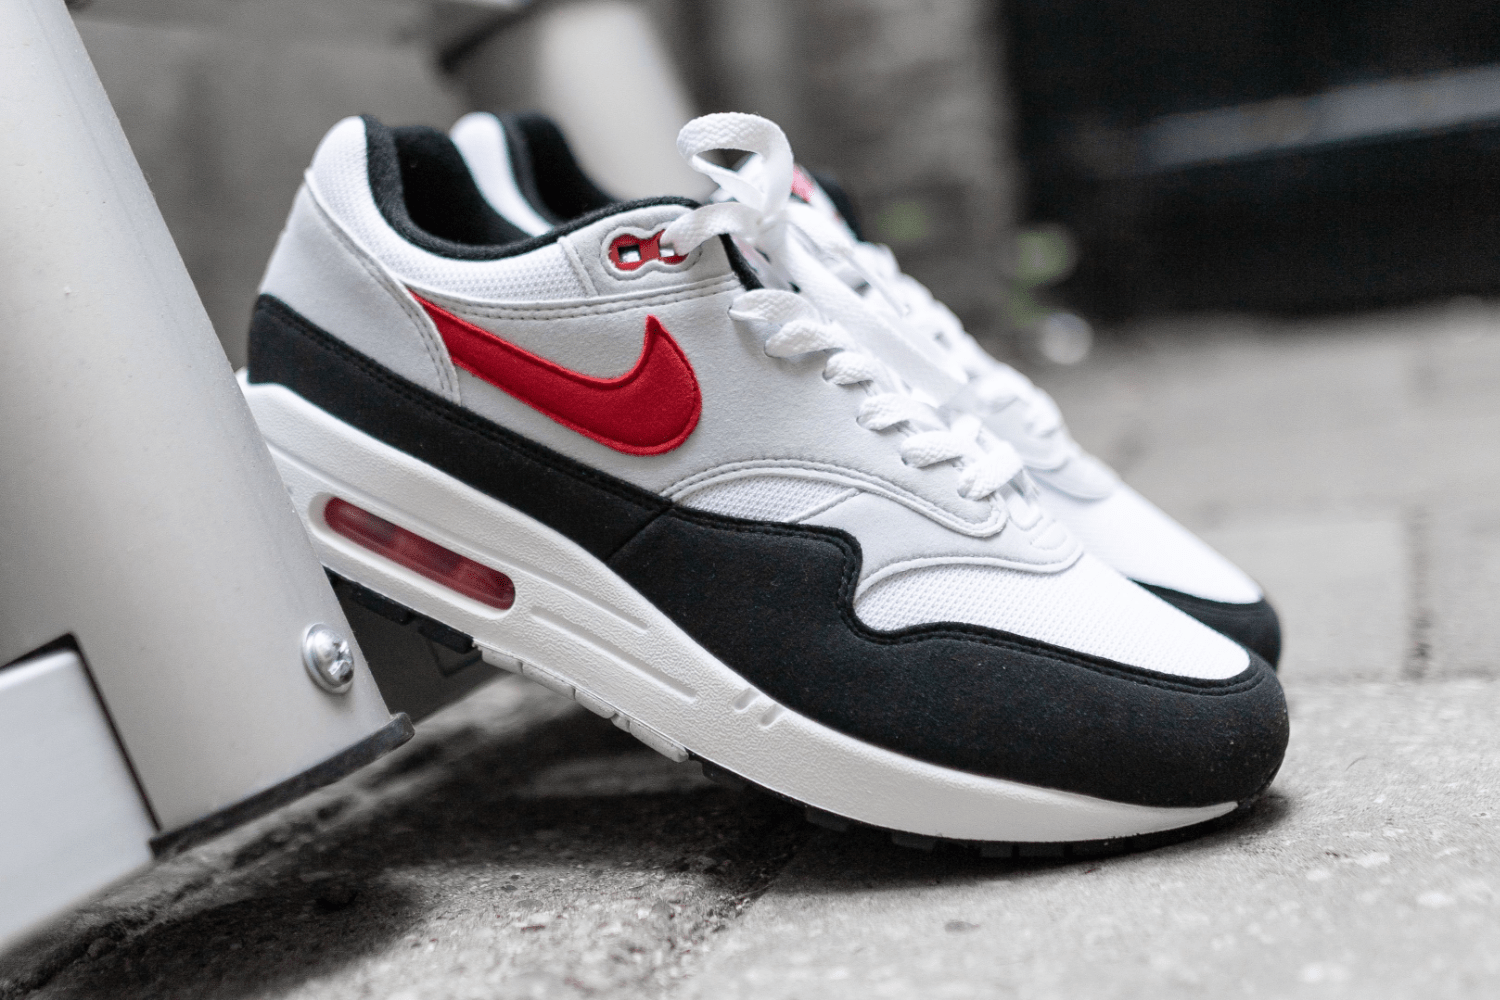 Score Nike Air Max 1s and other popular models with 25% off